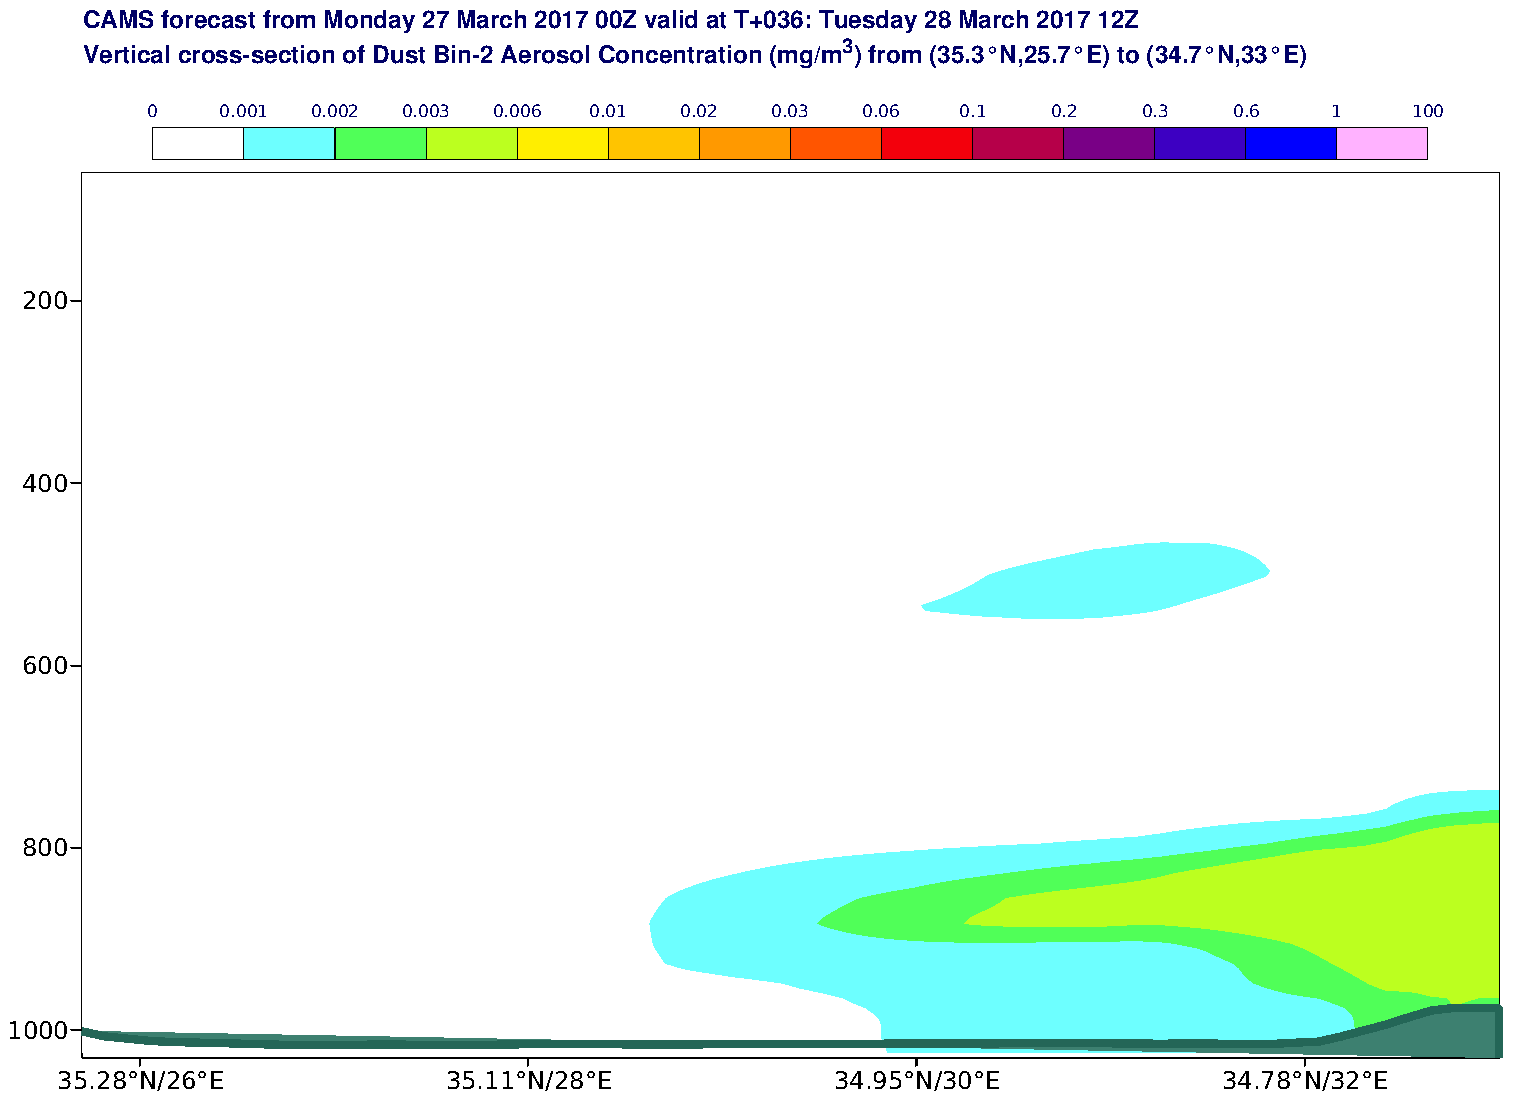 Vertical cross-section of Dust Bin-2 Aerosol Concentration (mg/m3) valid at T36 - 2017-03-28 12:00